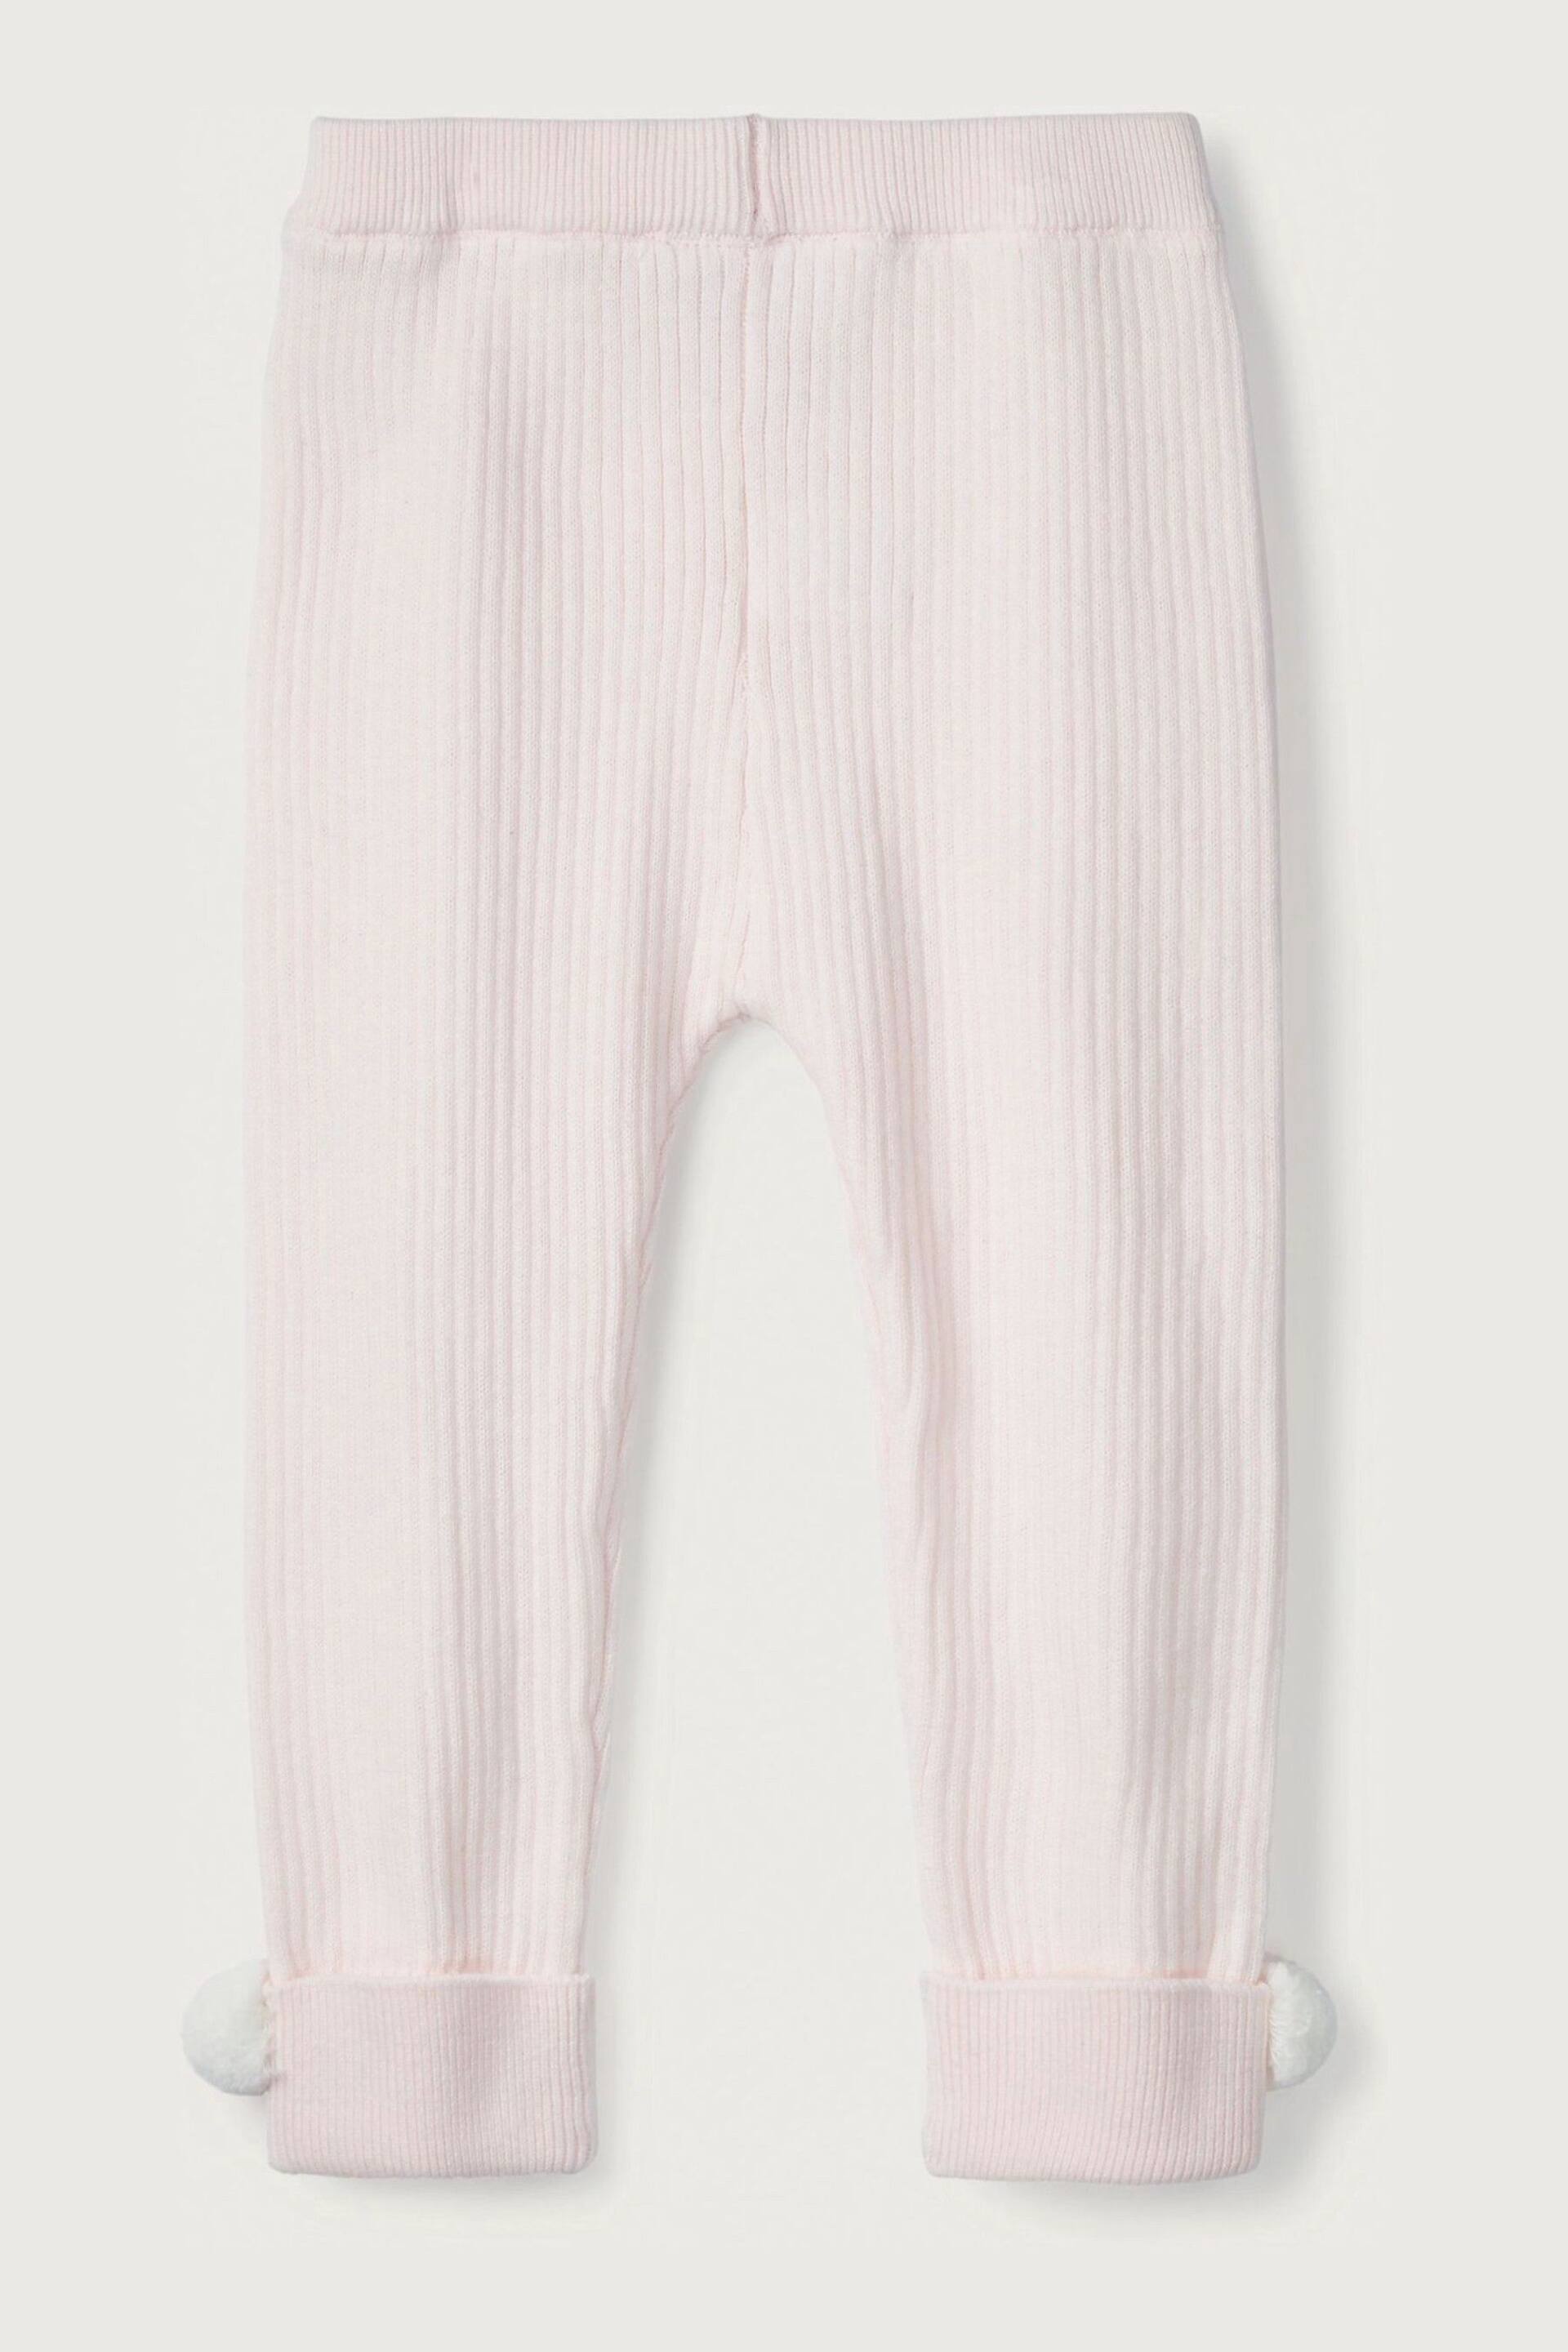 The White Company Pink Pom Knitted Leggings - Image 4 of 4